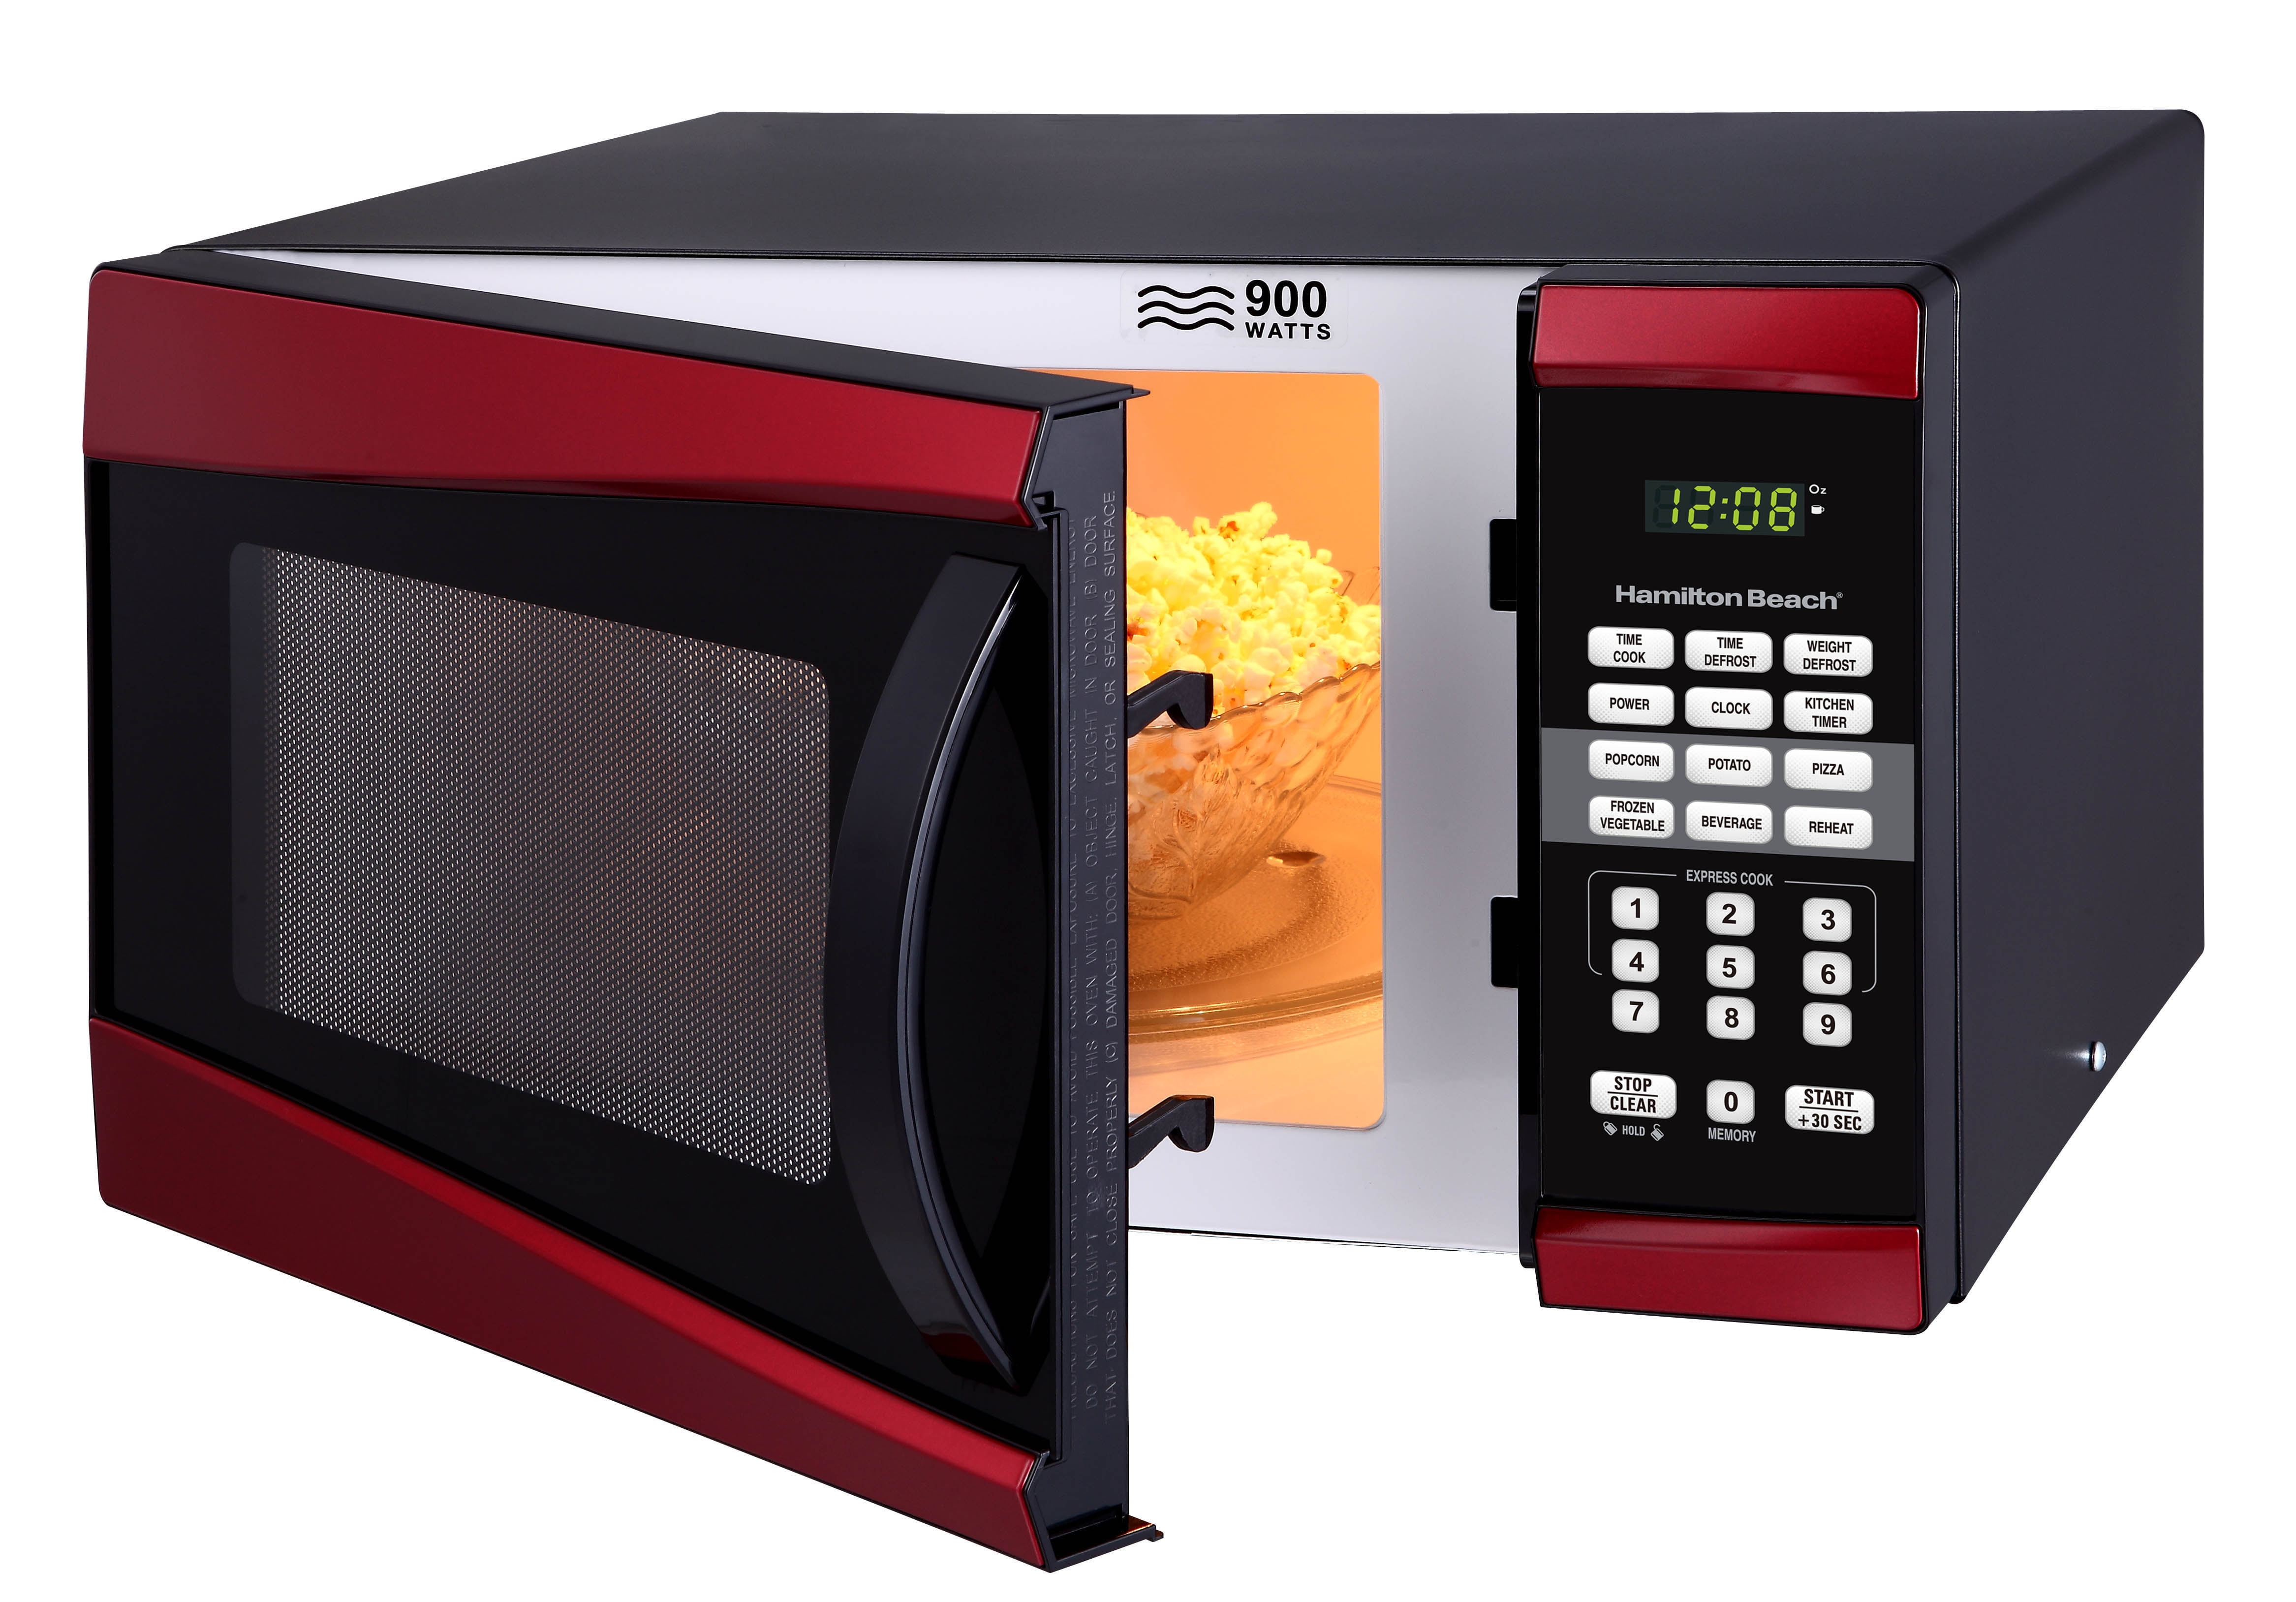 DIGITAL COUNTERTOP MICROWAVE OVEN HAMILTON BEACH COLORS red free fast shipping 